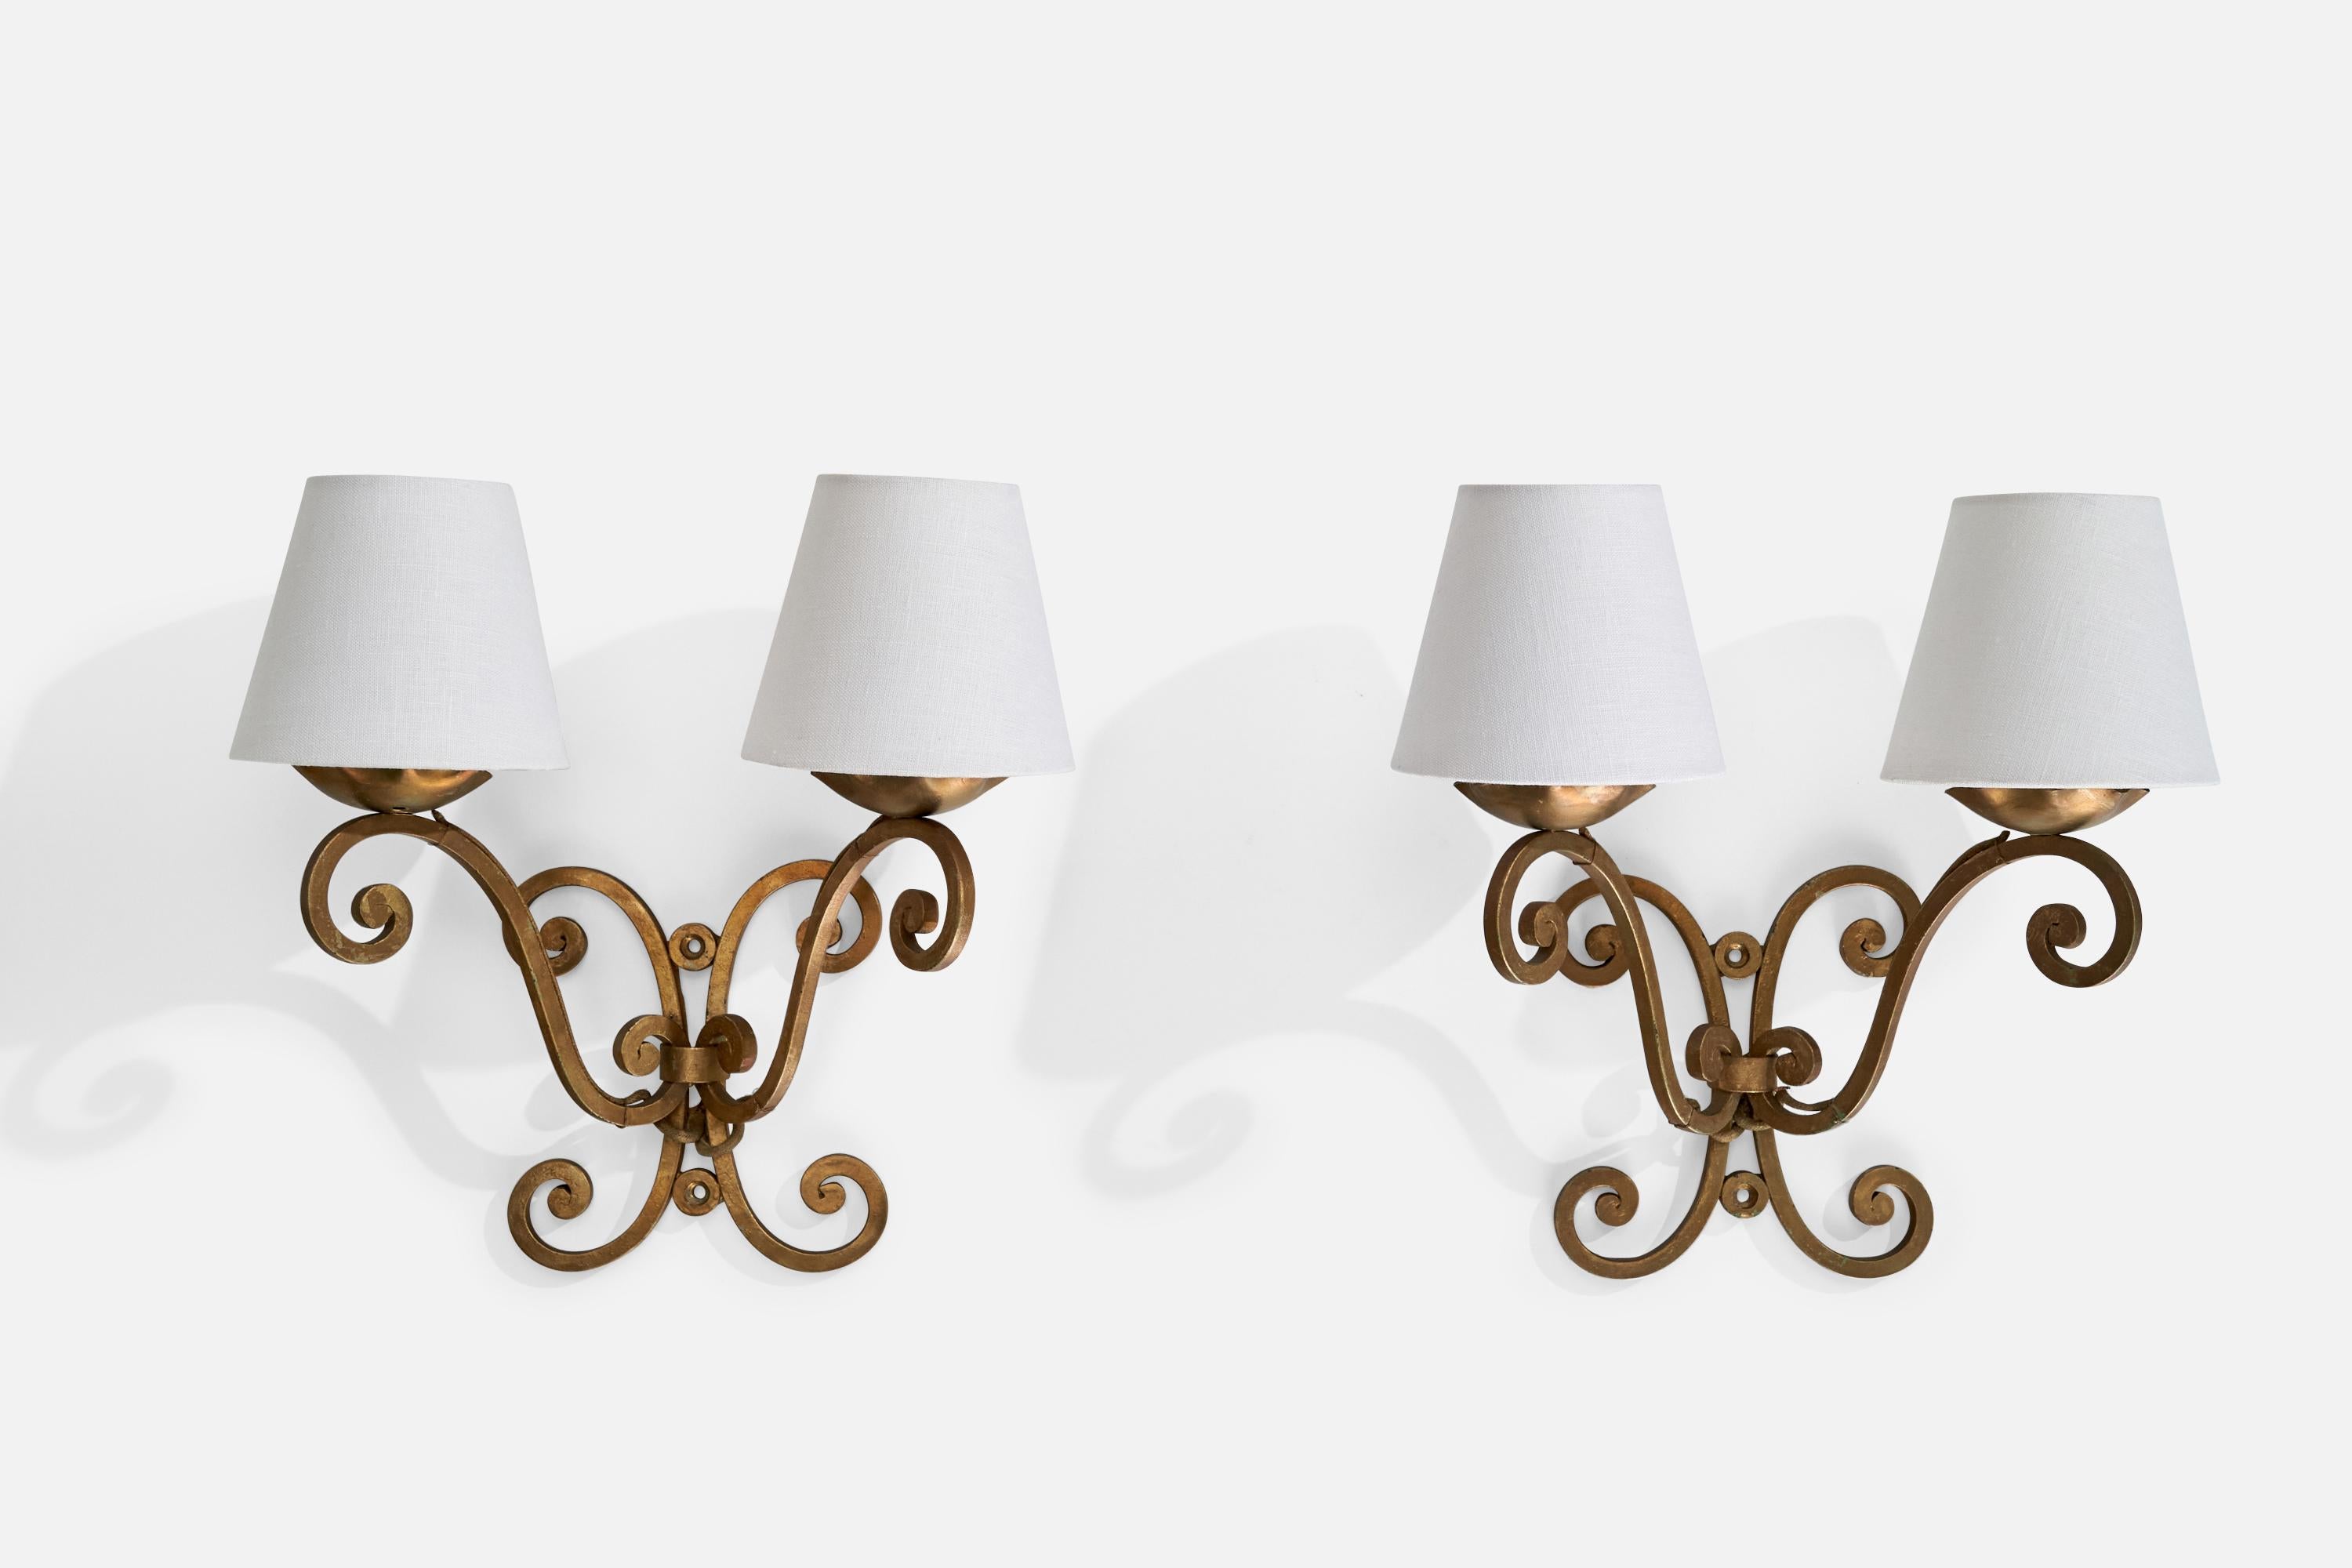 A pair of gold-painted metal and white fabric wall lights designed and produced in France, c. 1940s.

Overall Dimensions (inches): 13.5